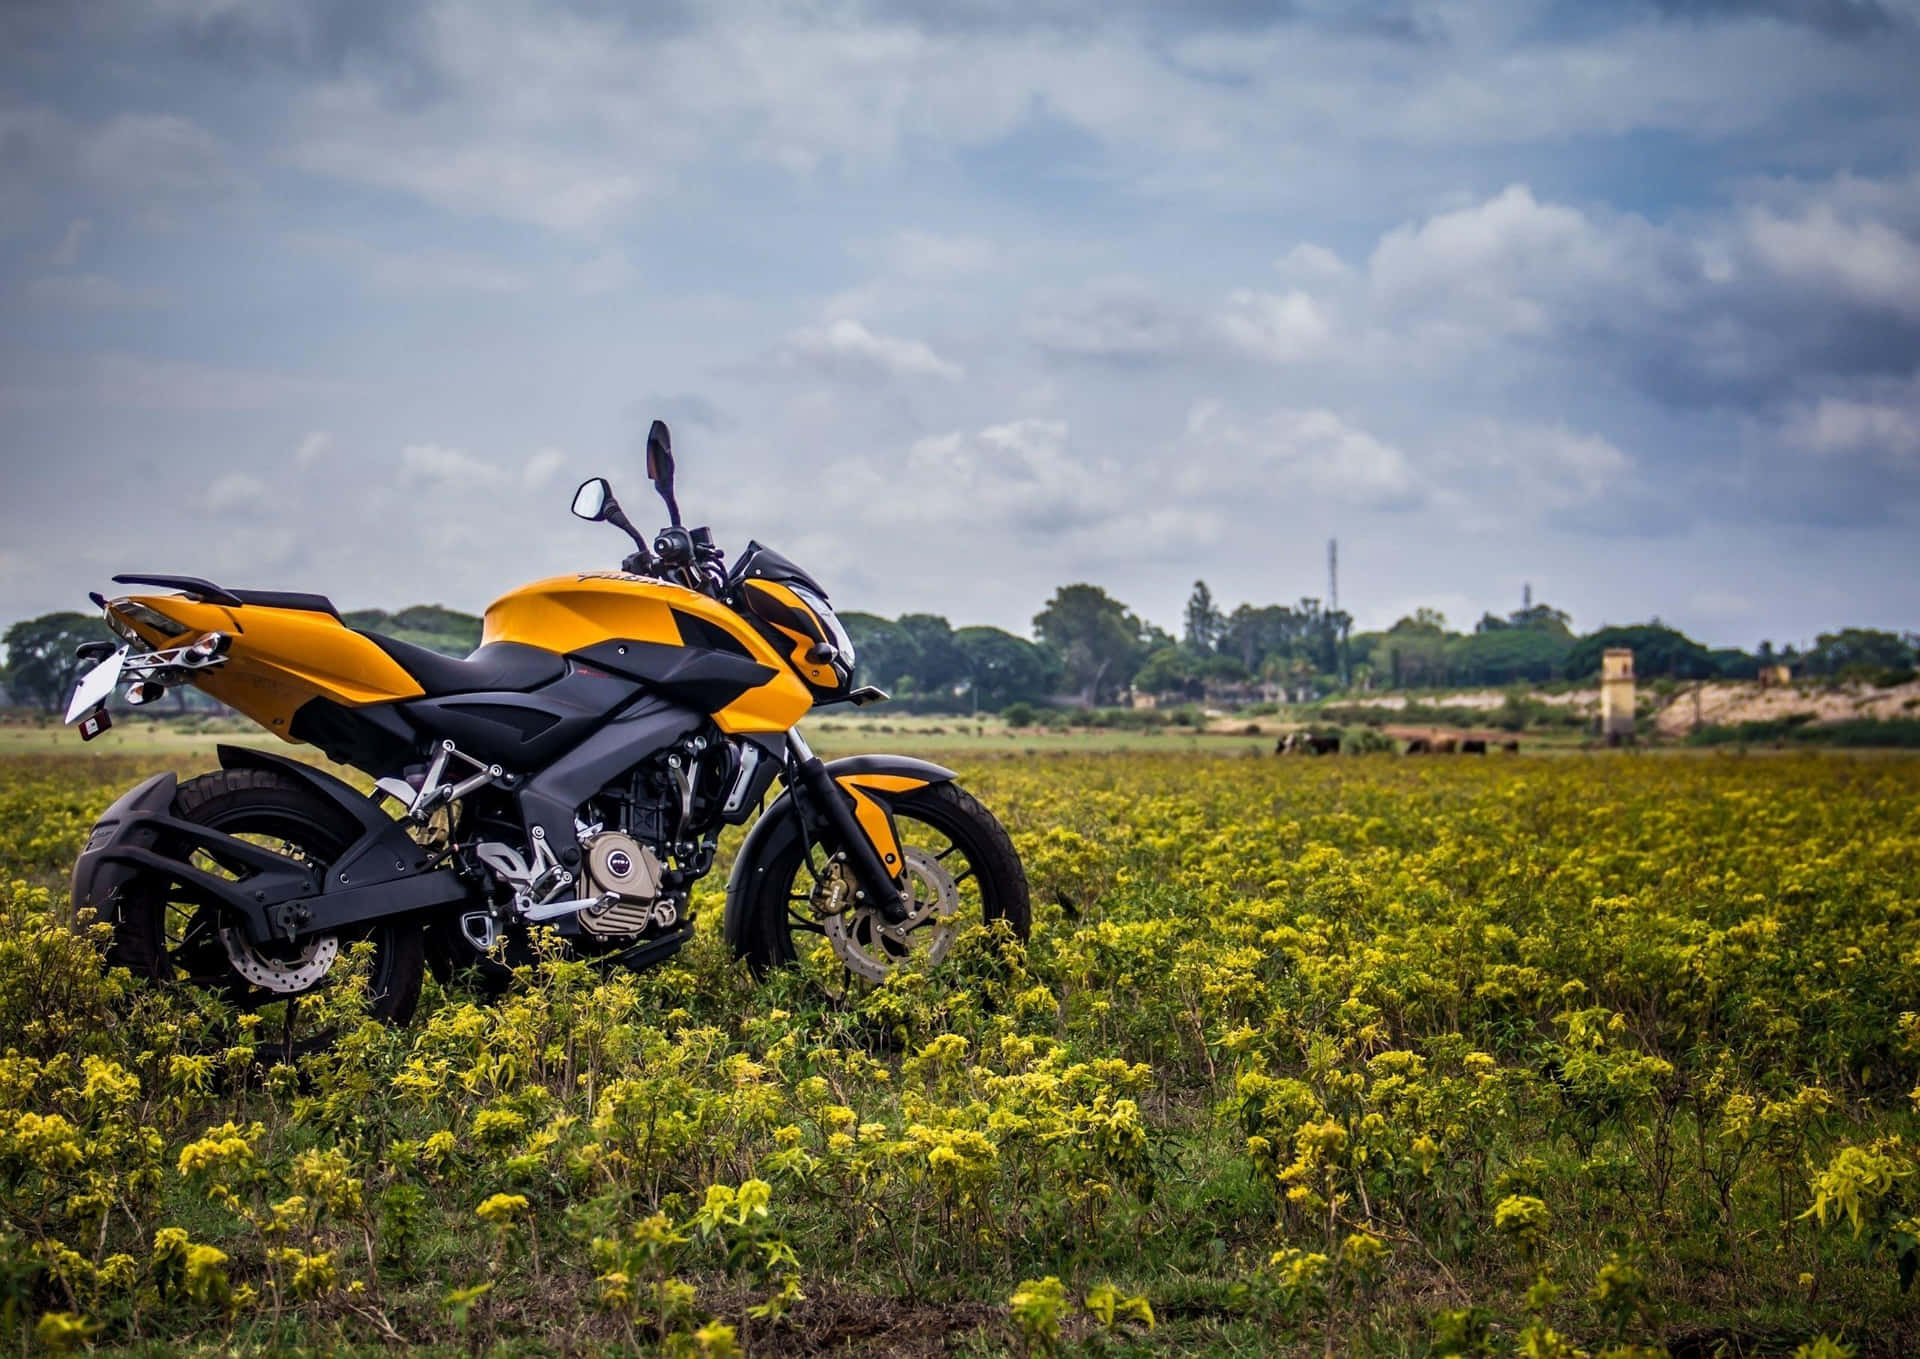 The NS 200 – A powerful motorcycle built for fun